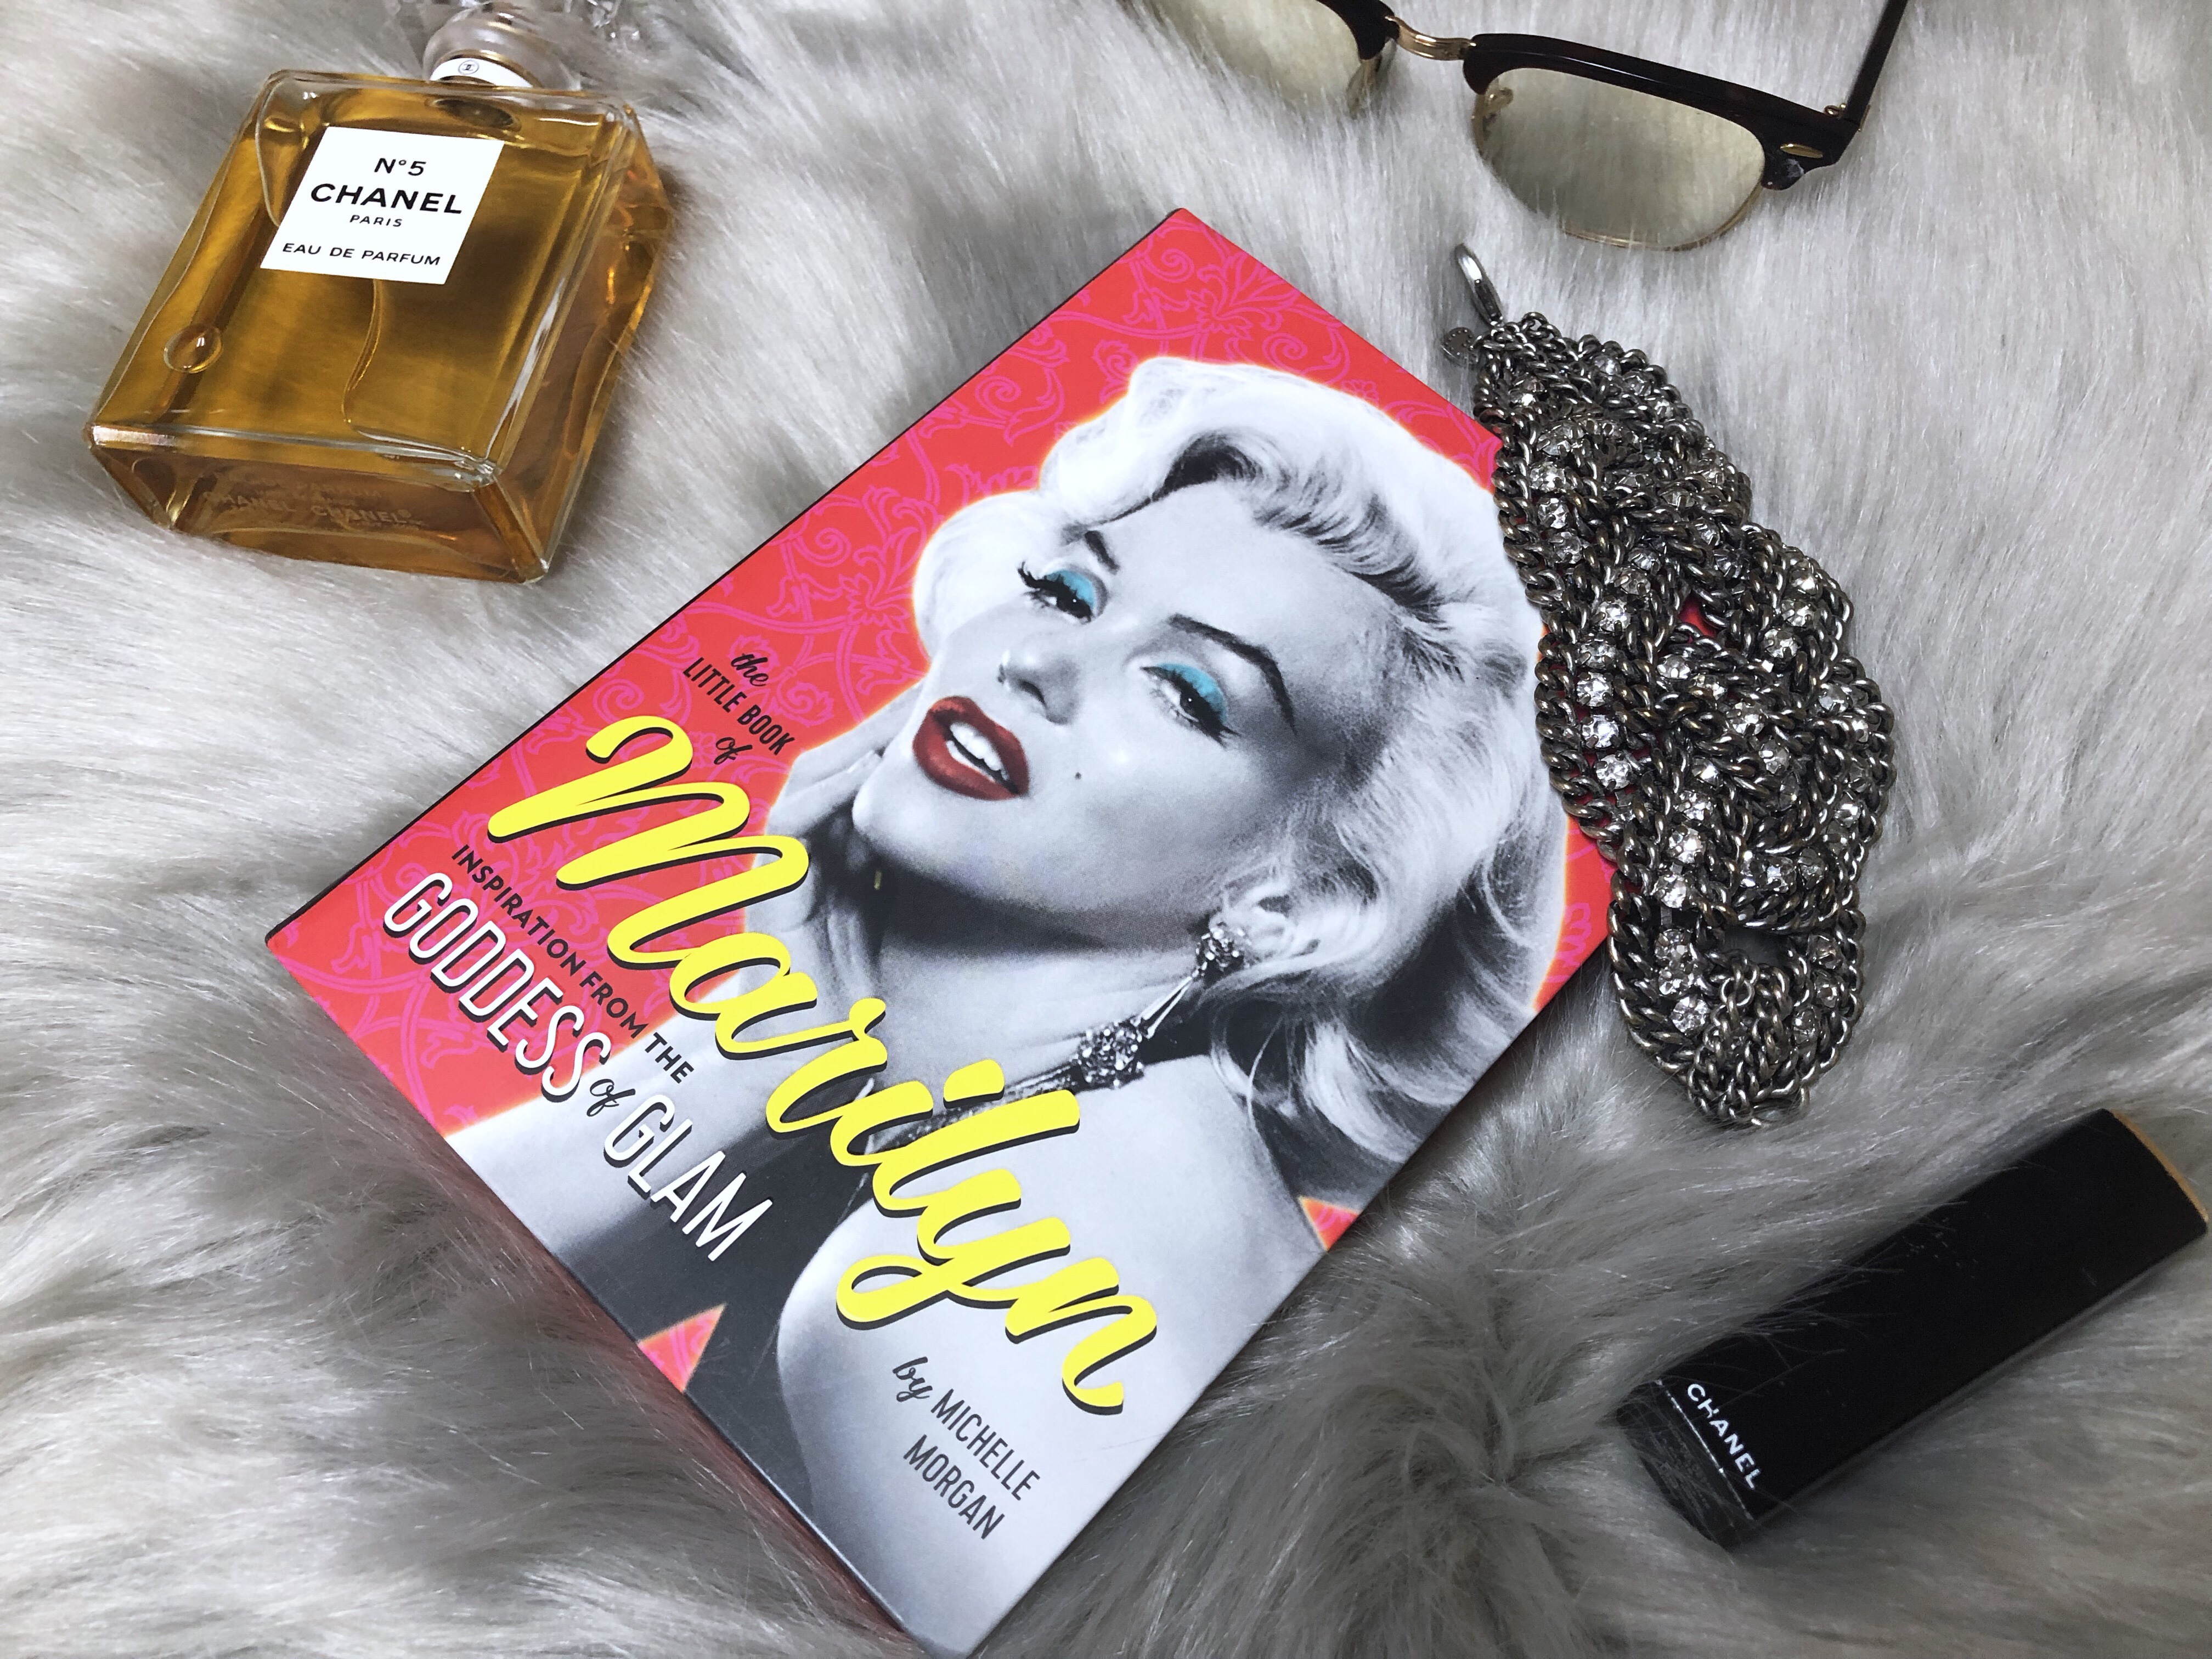 The little book of Marilyn, a little red book lies on a grey fur blanket with Chanel perfume and a diamond bracelet.